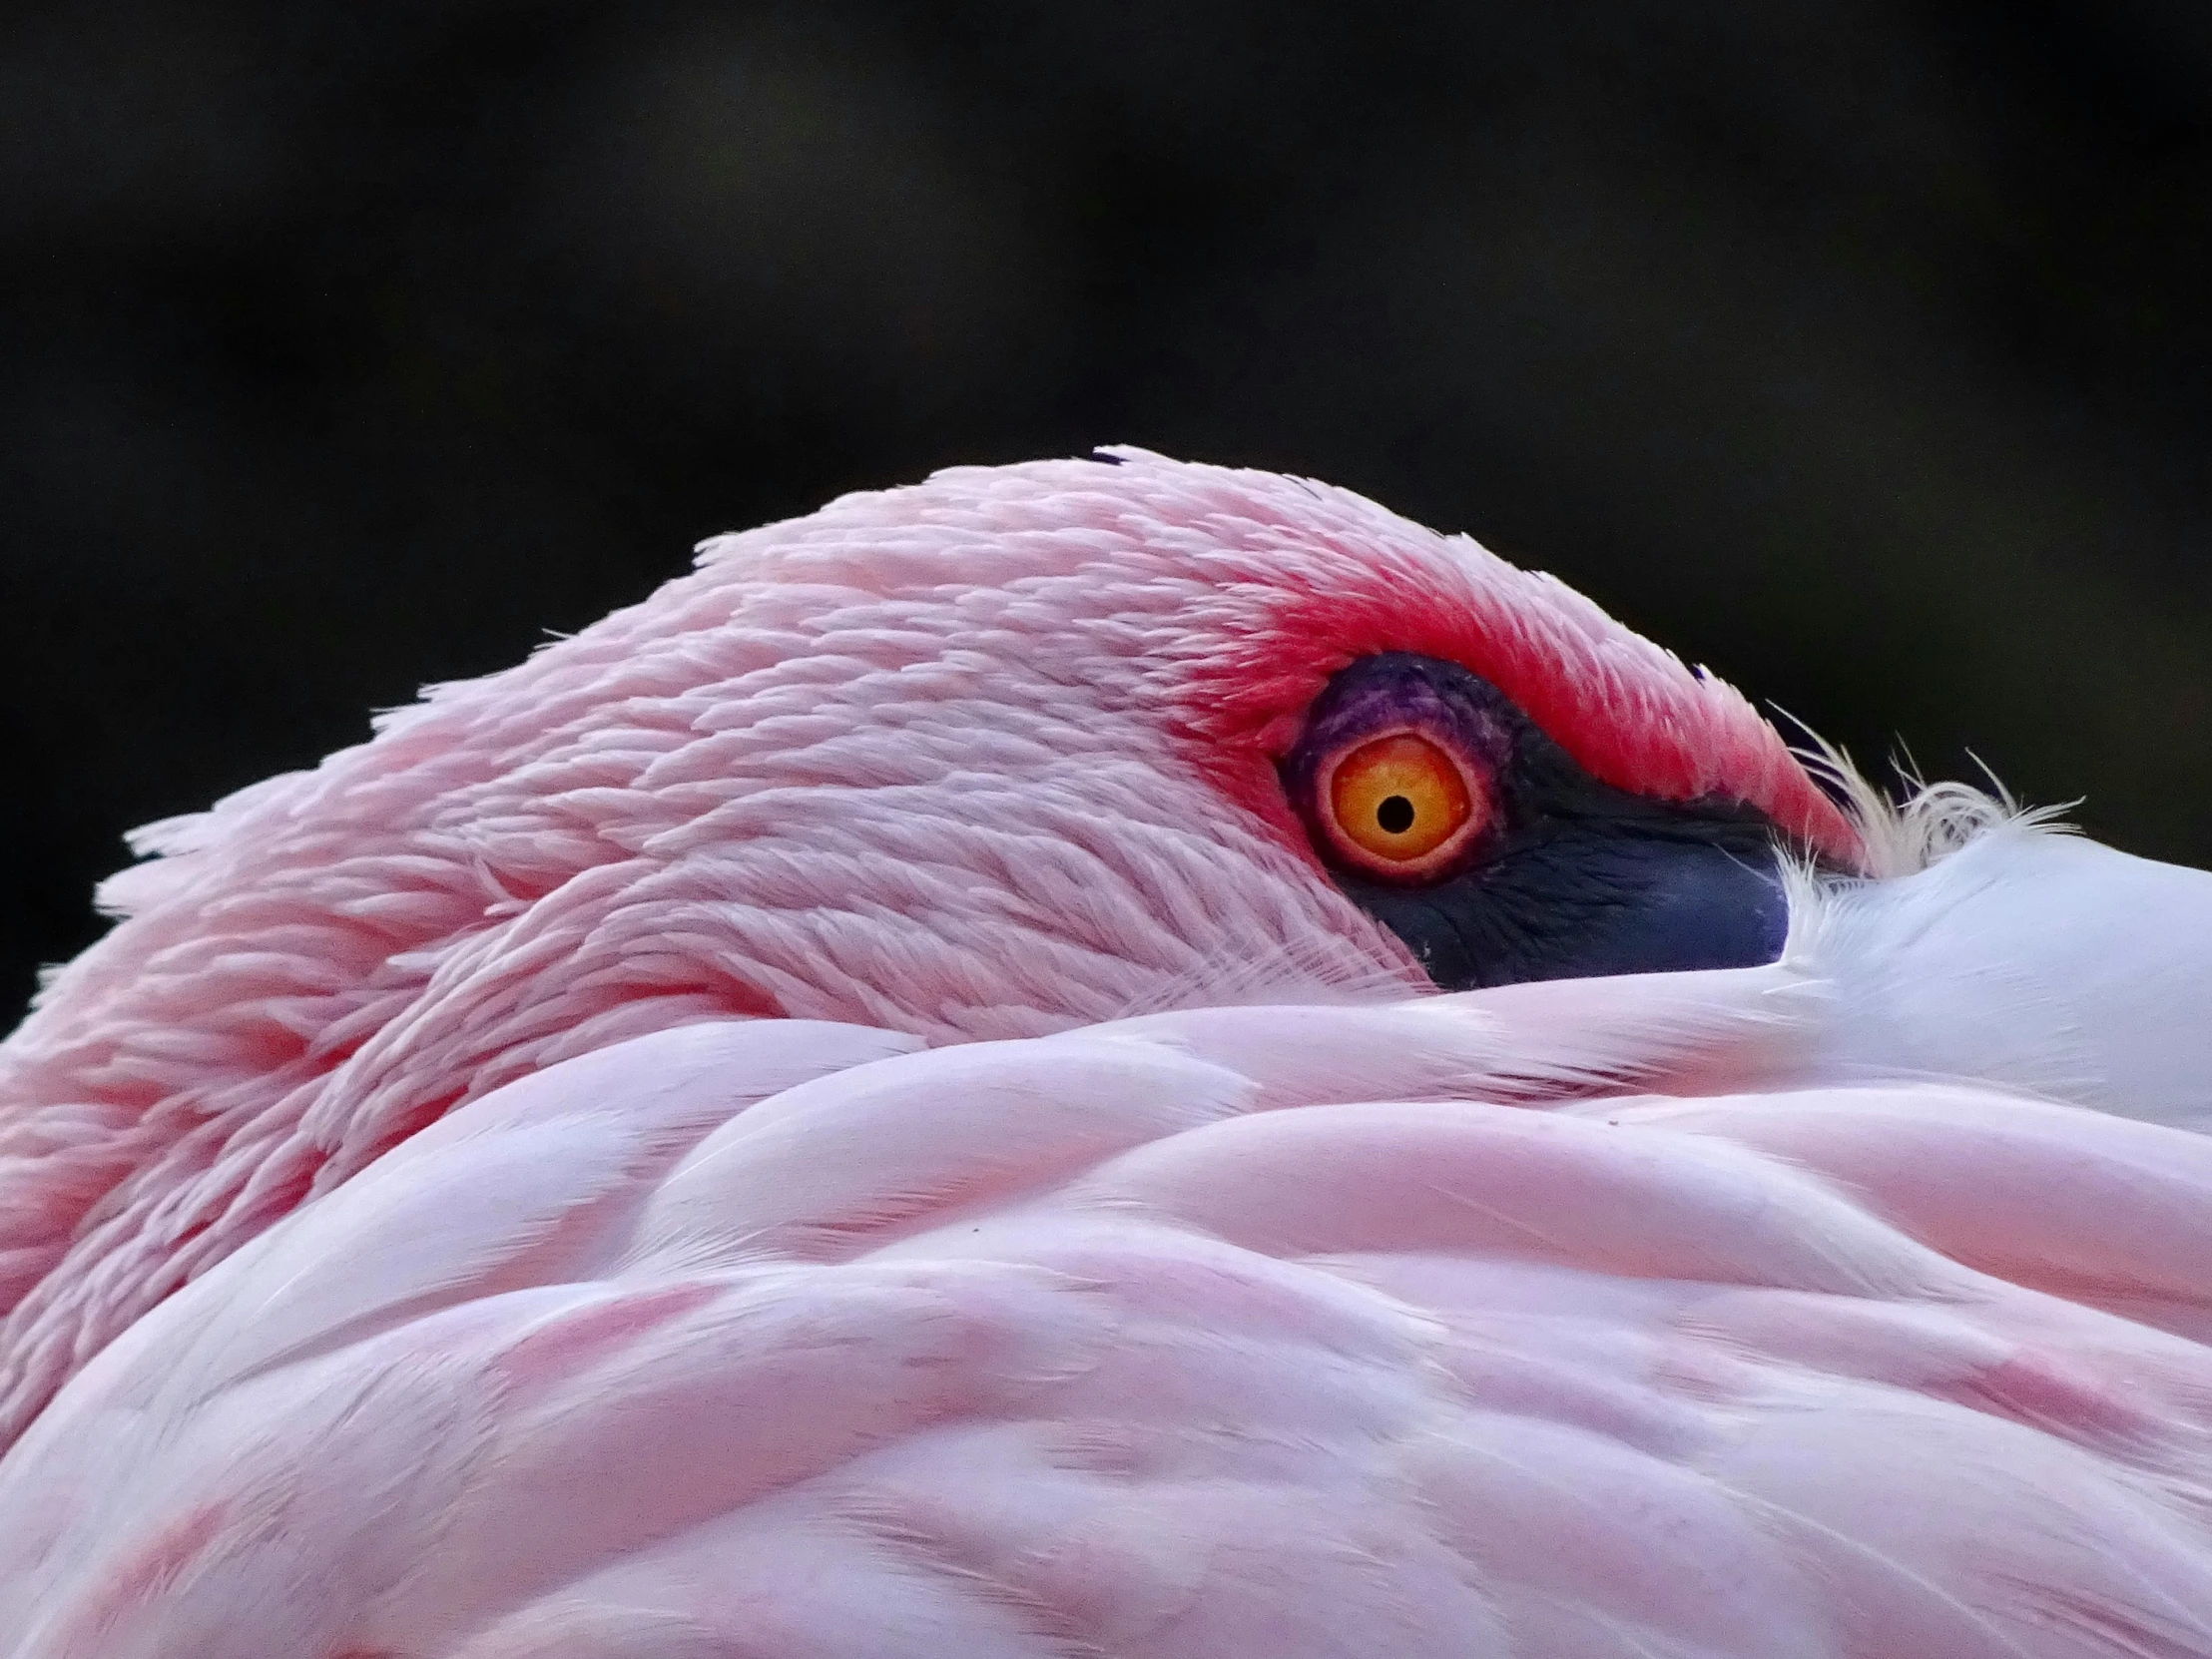 a large bird with long pink feathers and an orange eye